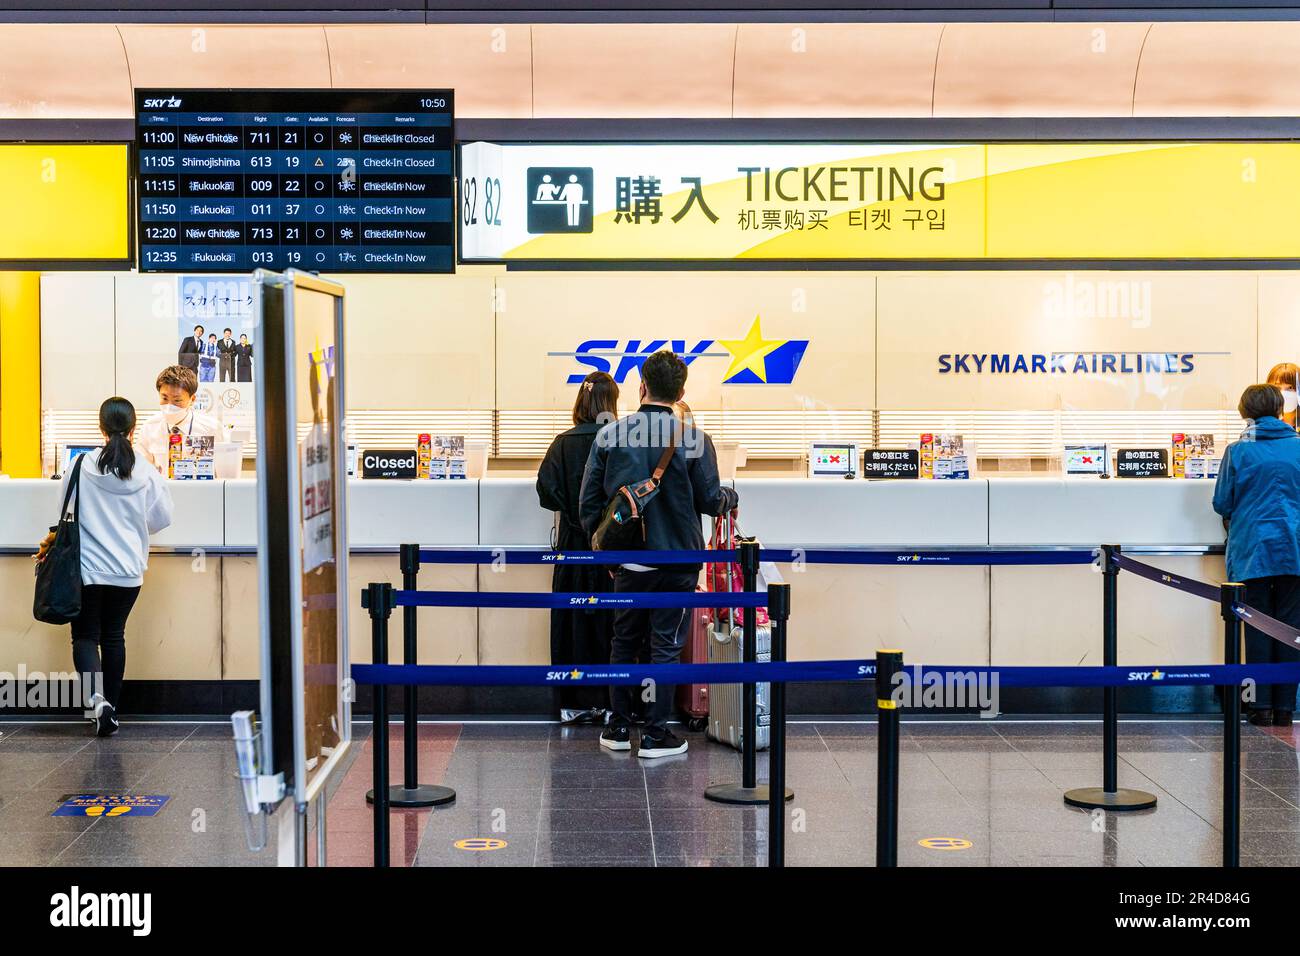 People at the Skymark Airlines ticketing counter at the North Wing of Terminal one, at Haneda Airport in Tokyo. Flight check-in display board above. Stock Photo